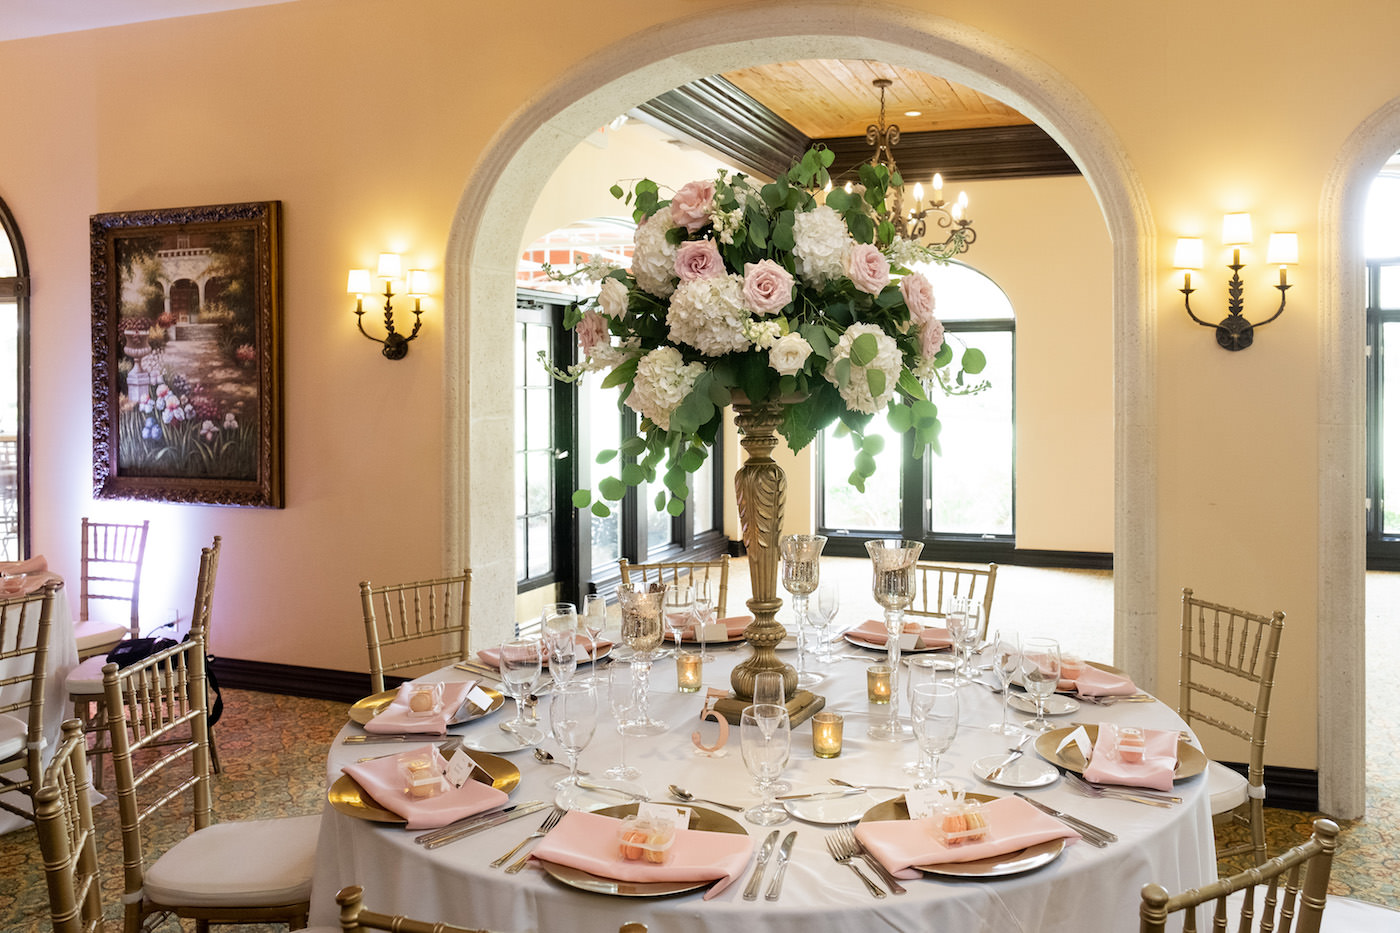 Wedding Reception Table with Gold Chiavari Chairs and Blush Pink Napkins on Gold Charger Plates and Tall Gold Candlestick Loose Floral Centerpiece featuring Blush Pink Roses and Ivory Hydrangea with White Stock and Eucalyptus Greenery | Tampa Wedding Venue Avila Golf & Country Club